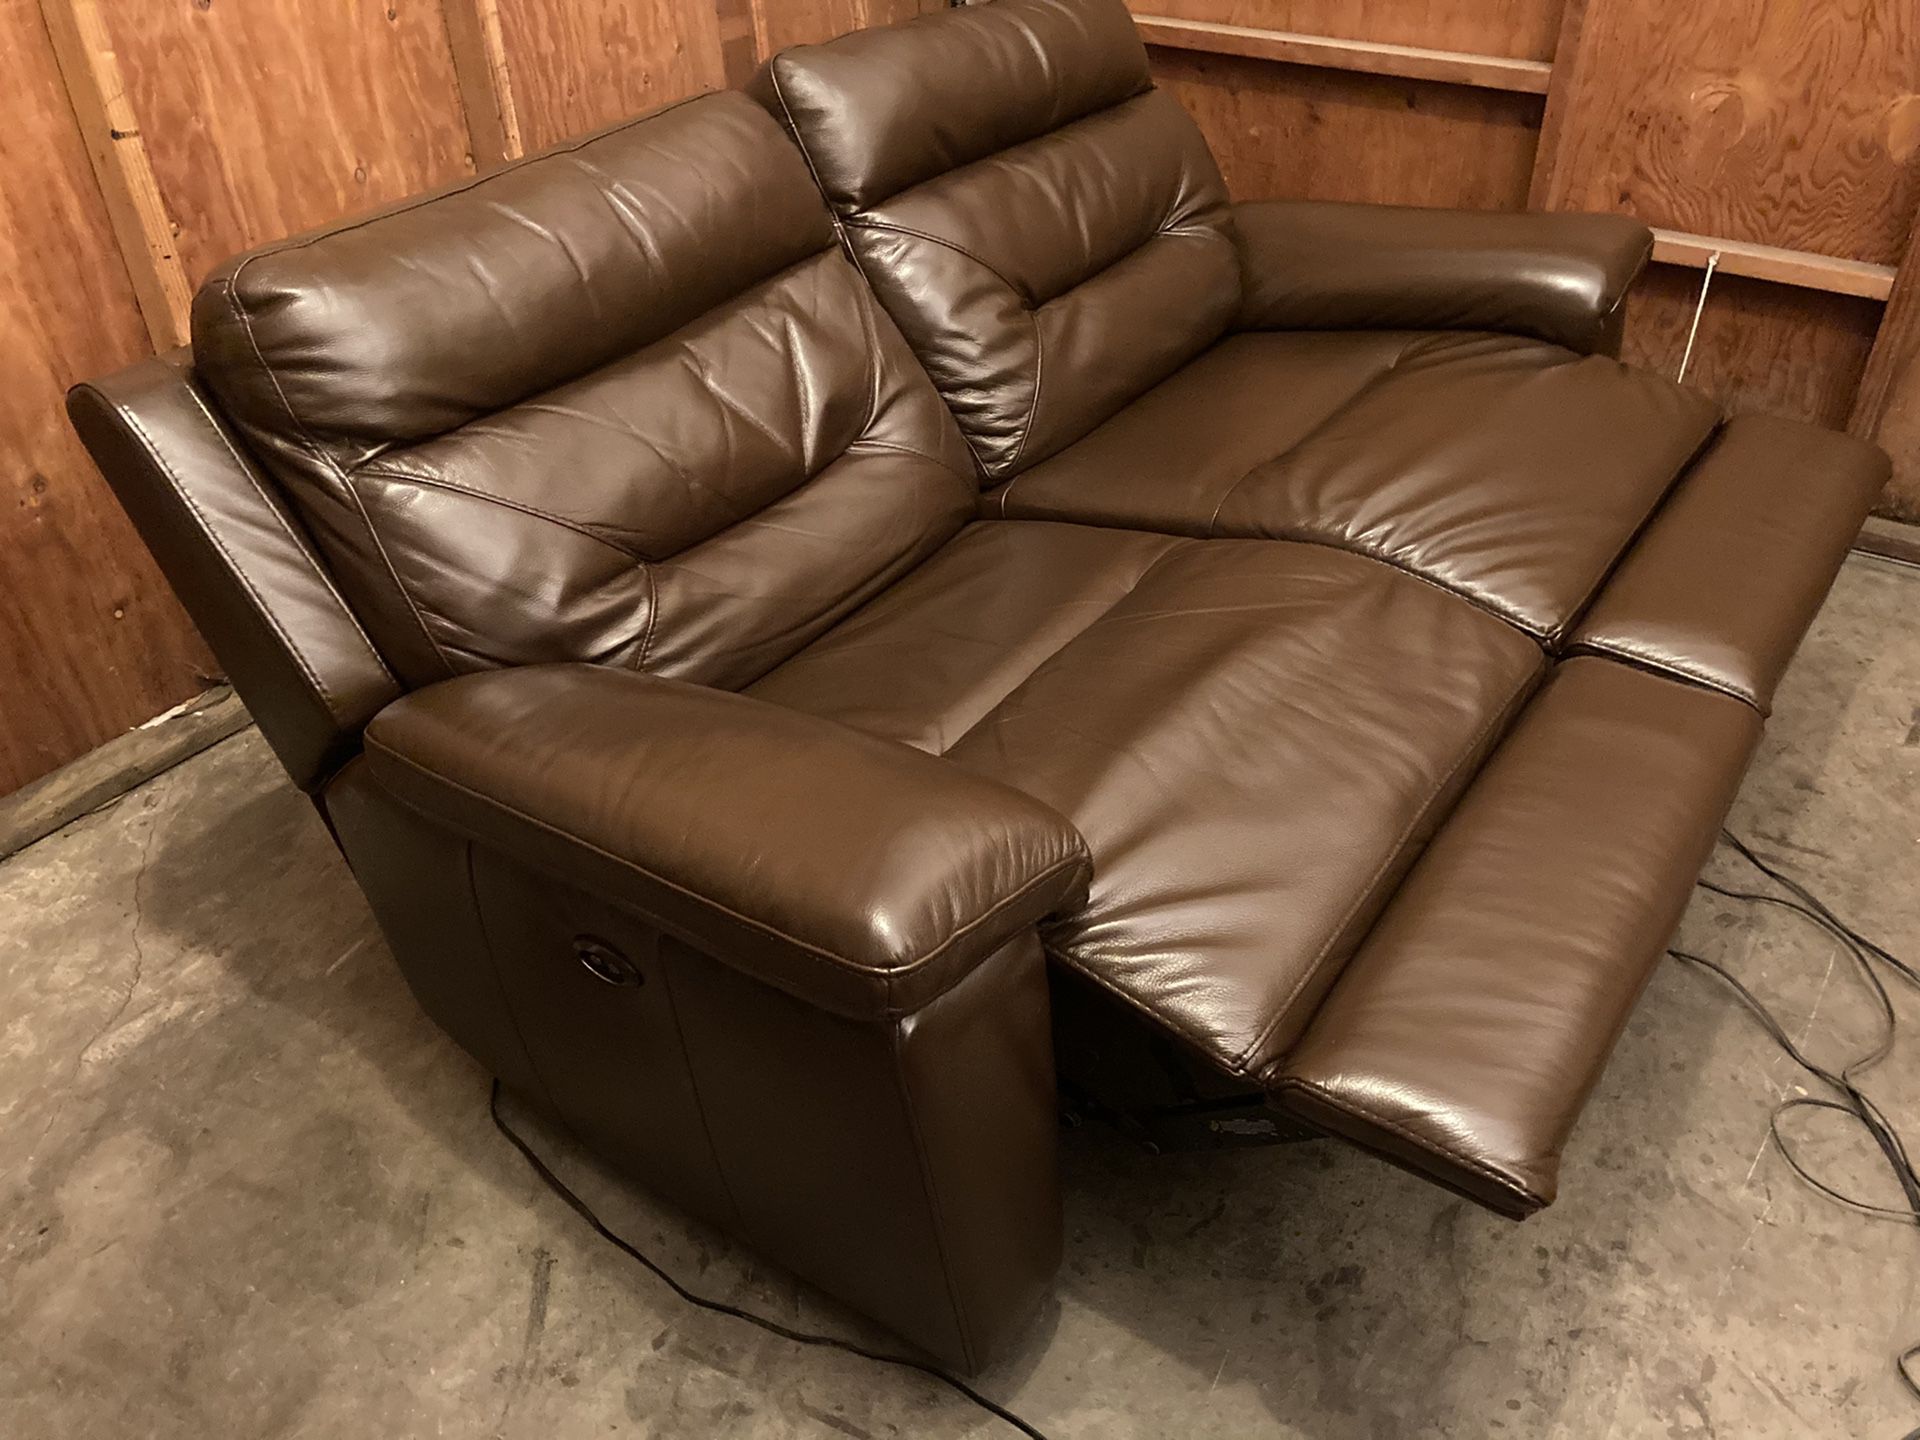 Power electric Recliner Loveseat - free Delivery